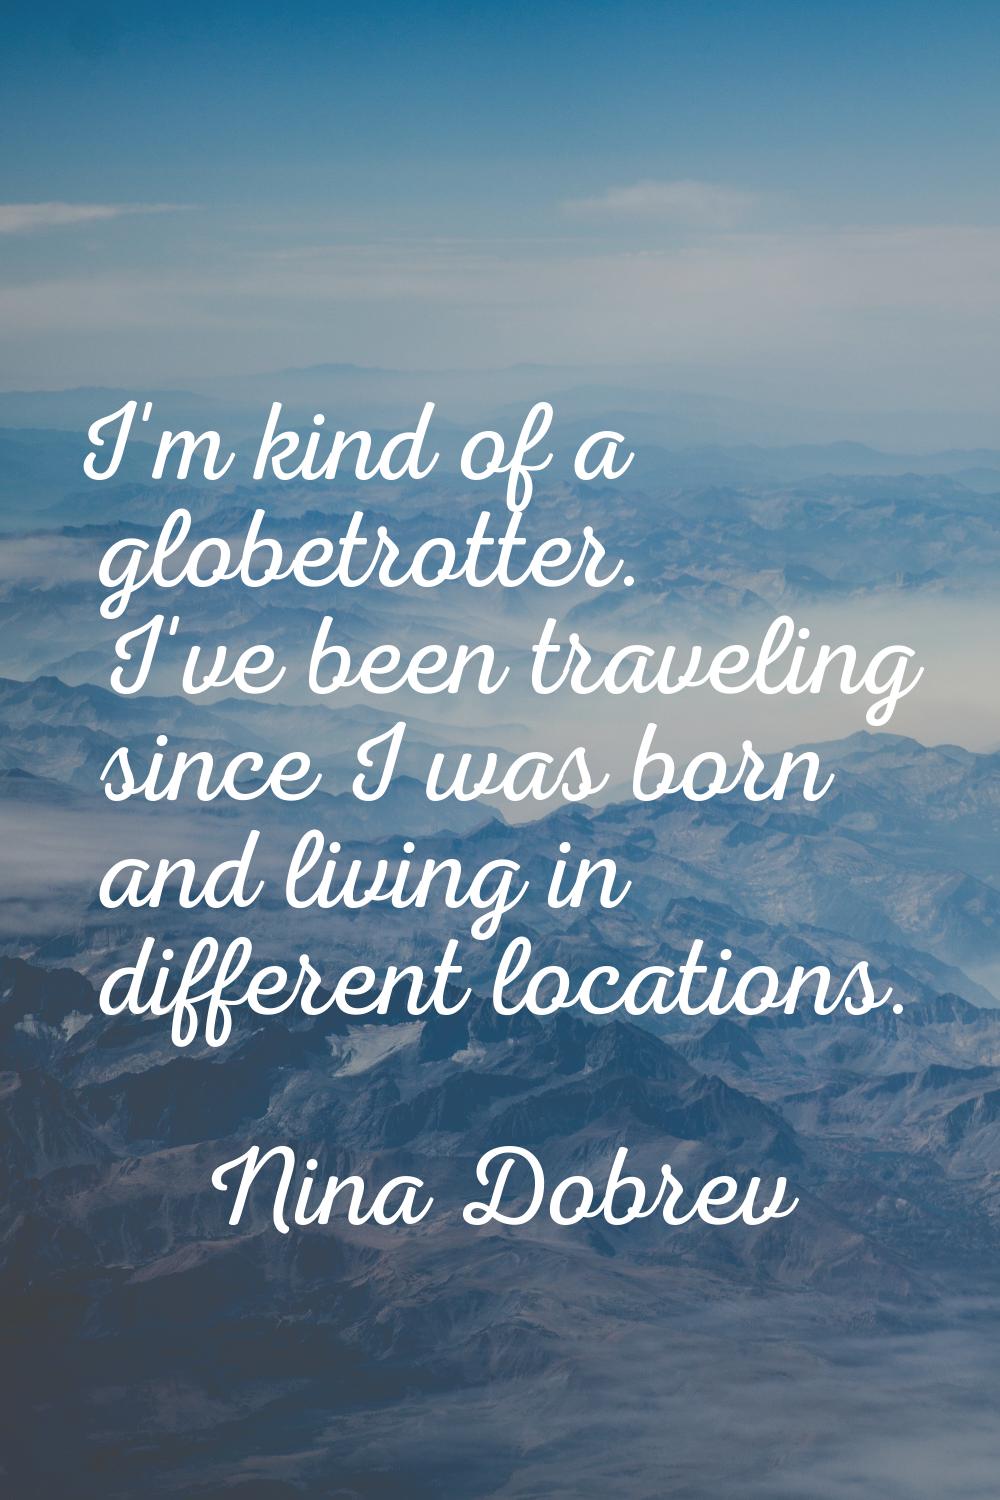 I'm kind of a globetrotter. I've been traveling since I was born and living in different locations.